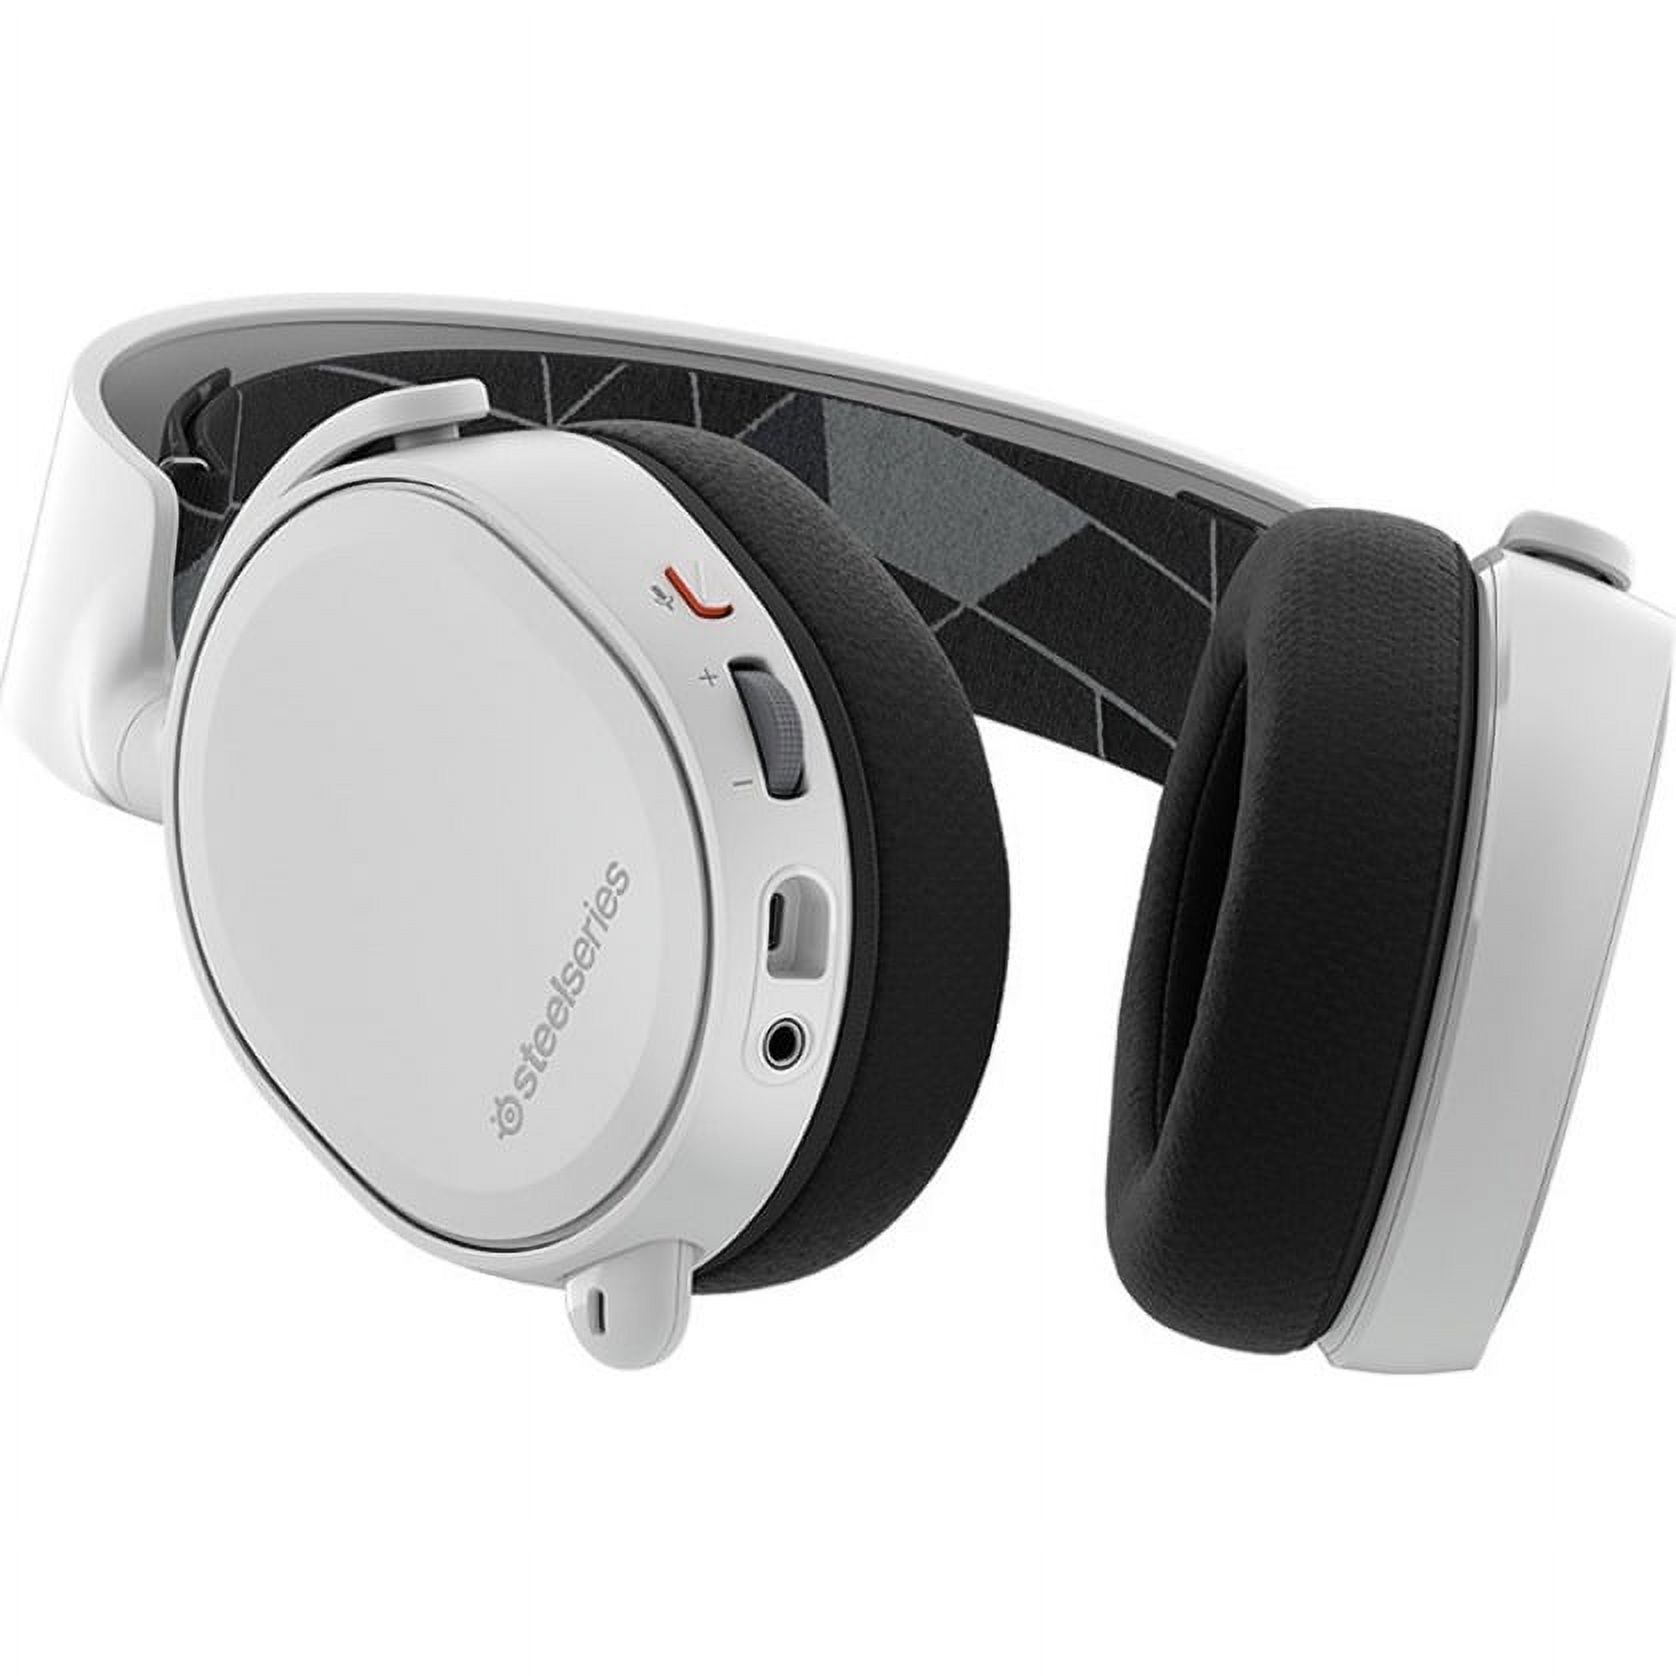 SteelSeries Arctis 3 Gaming Headset, White, 4T8451 - image 3 of 4